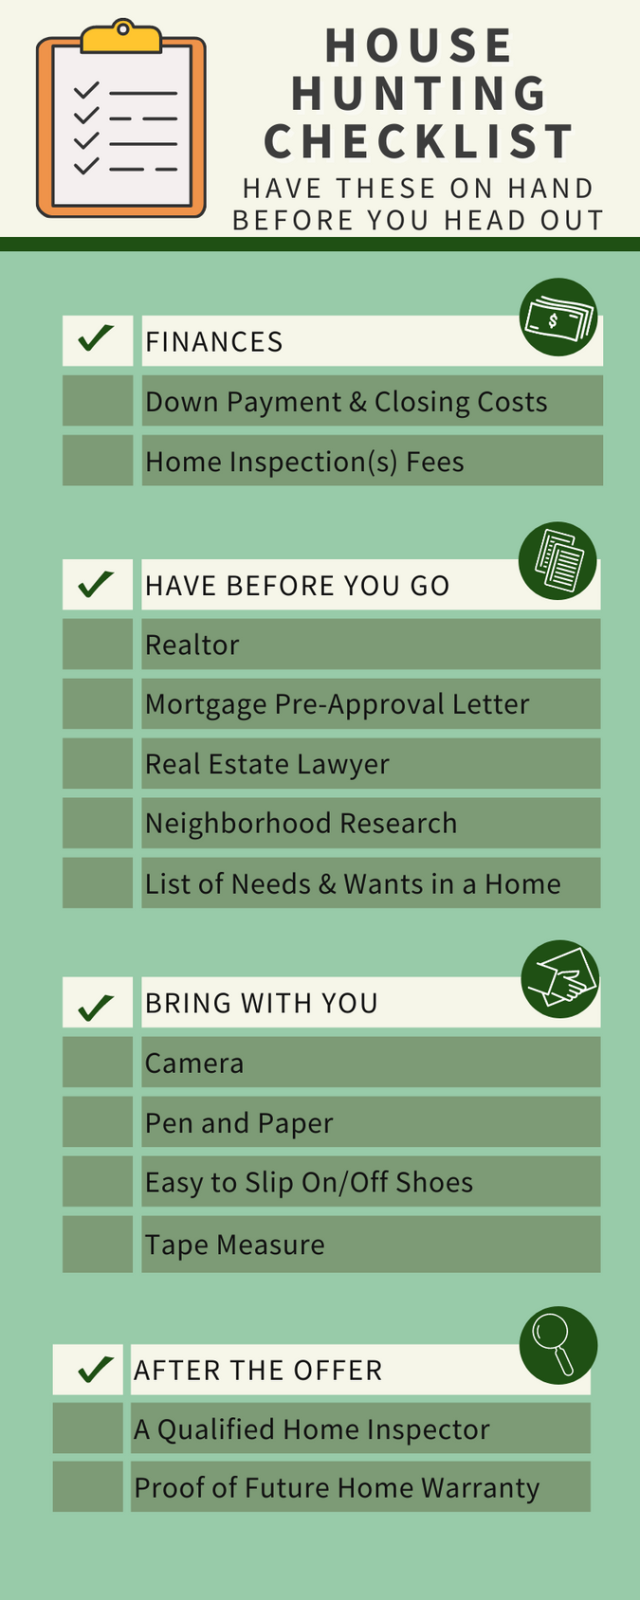 House Hunting Checklist: What To Have When Looking for a New Home